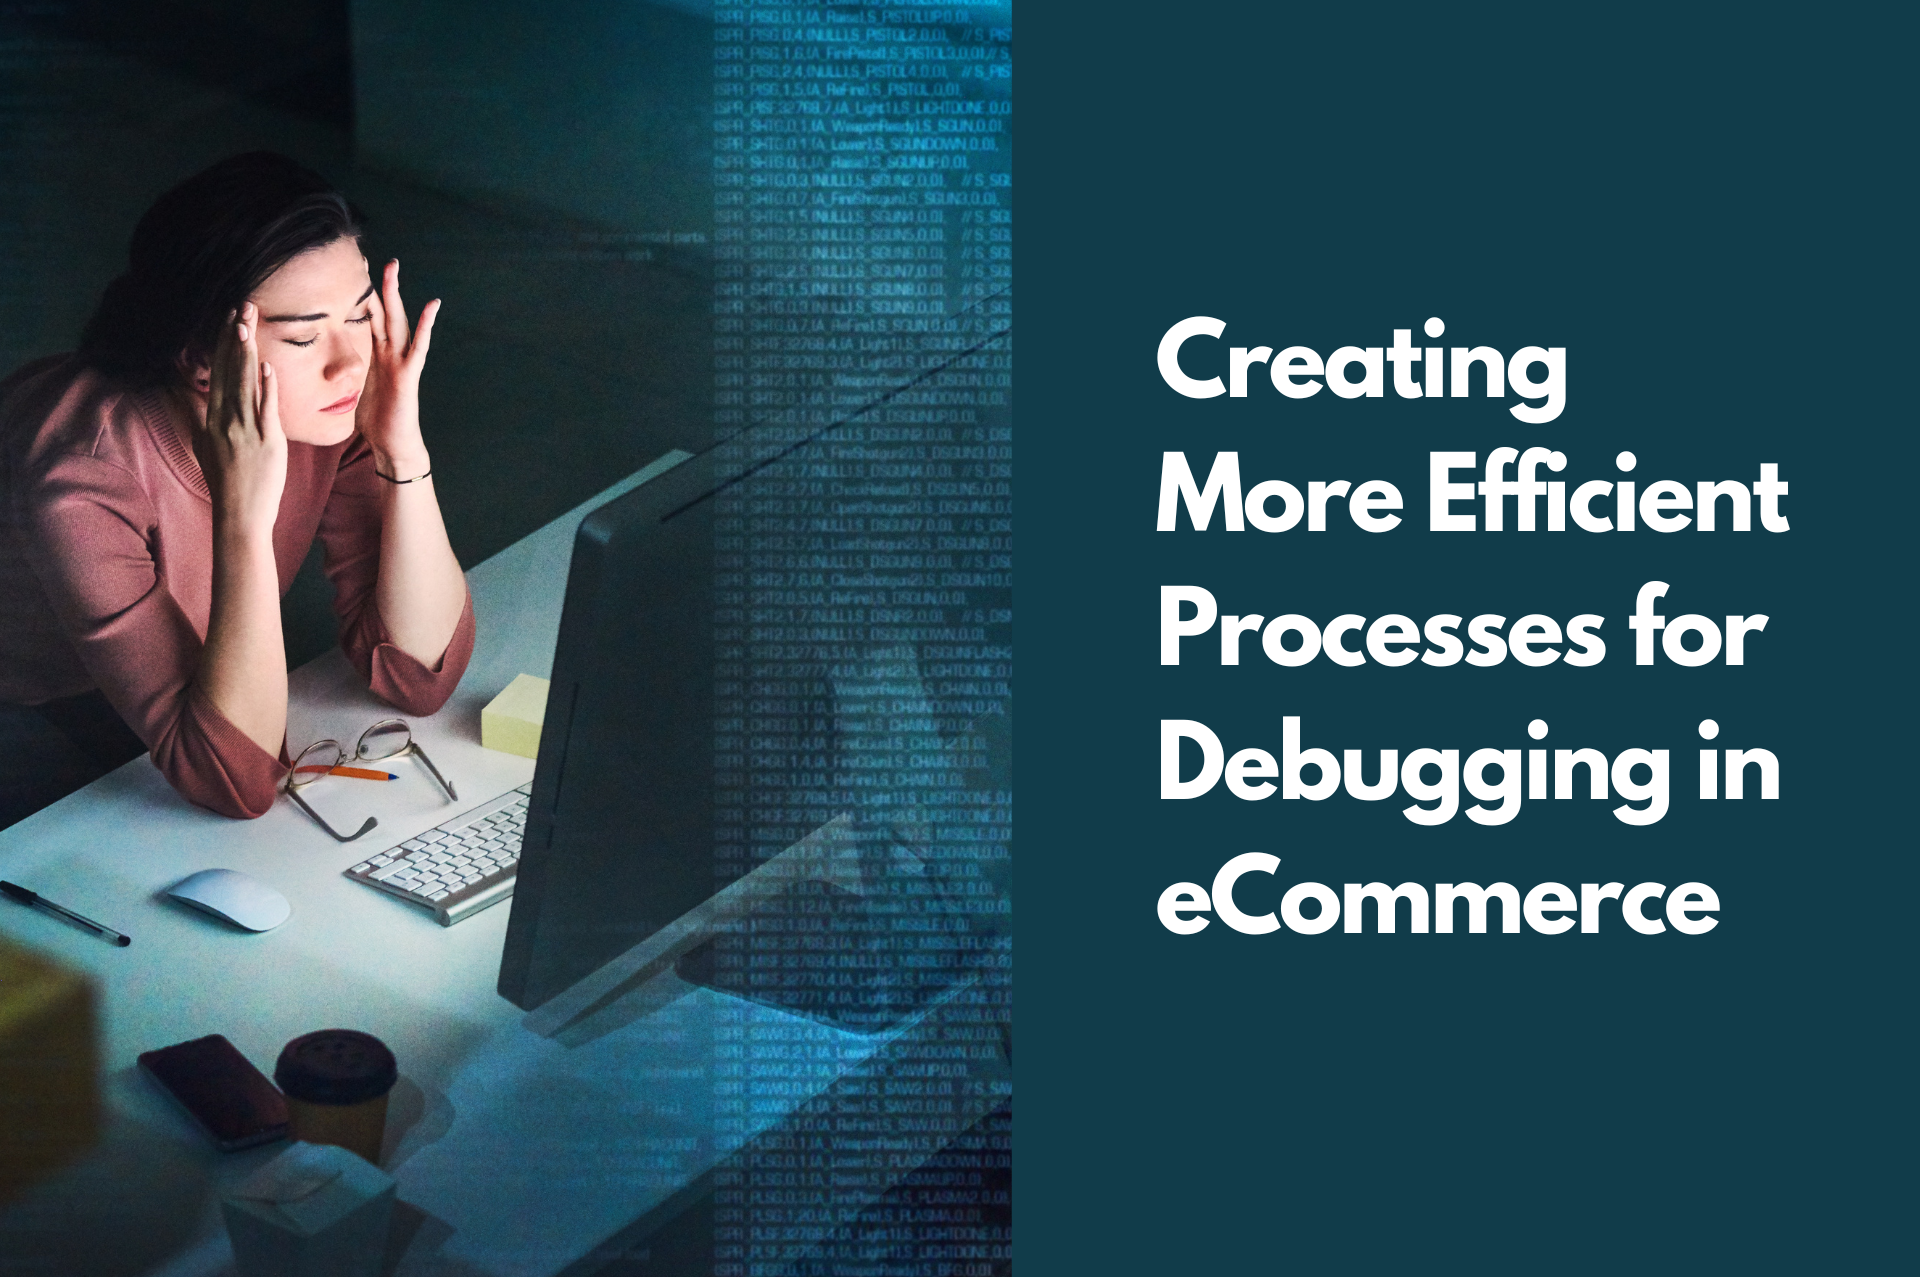 Creating More Efficient Processes for Debugging in eCommerce - Blag banner